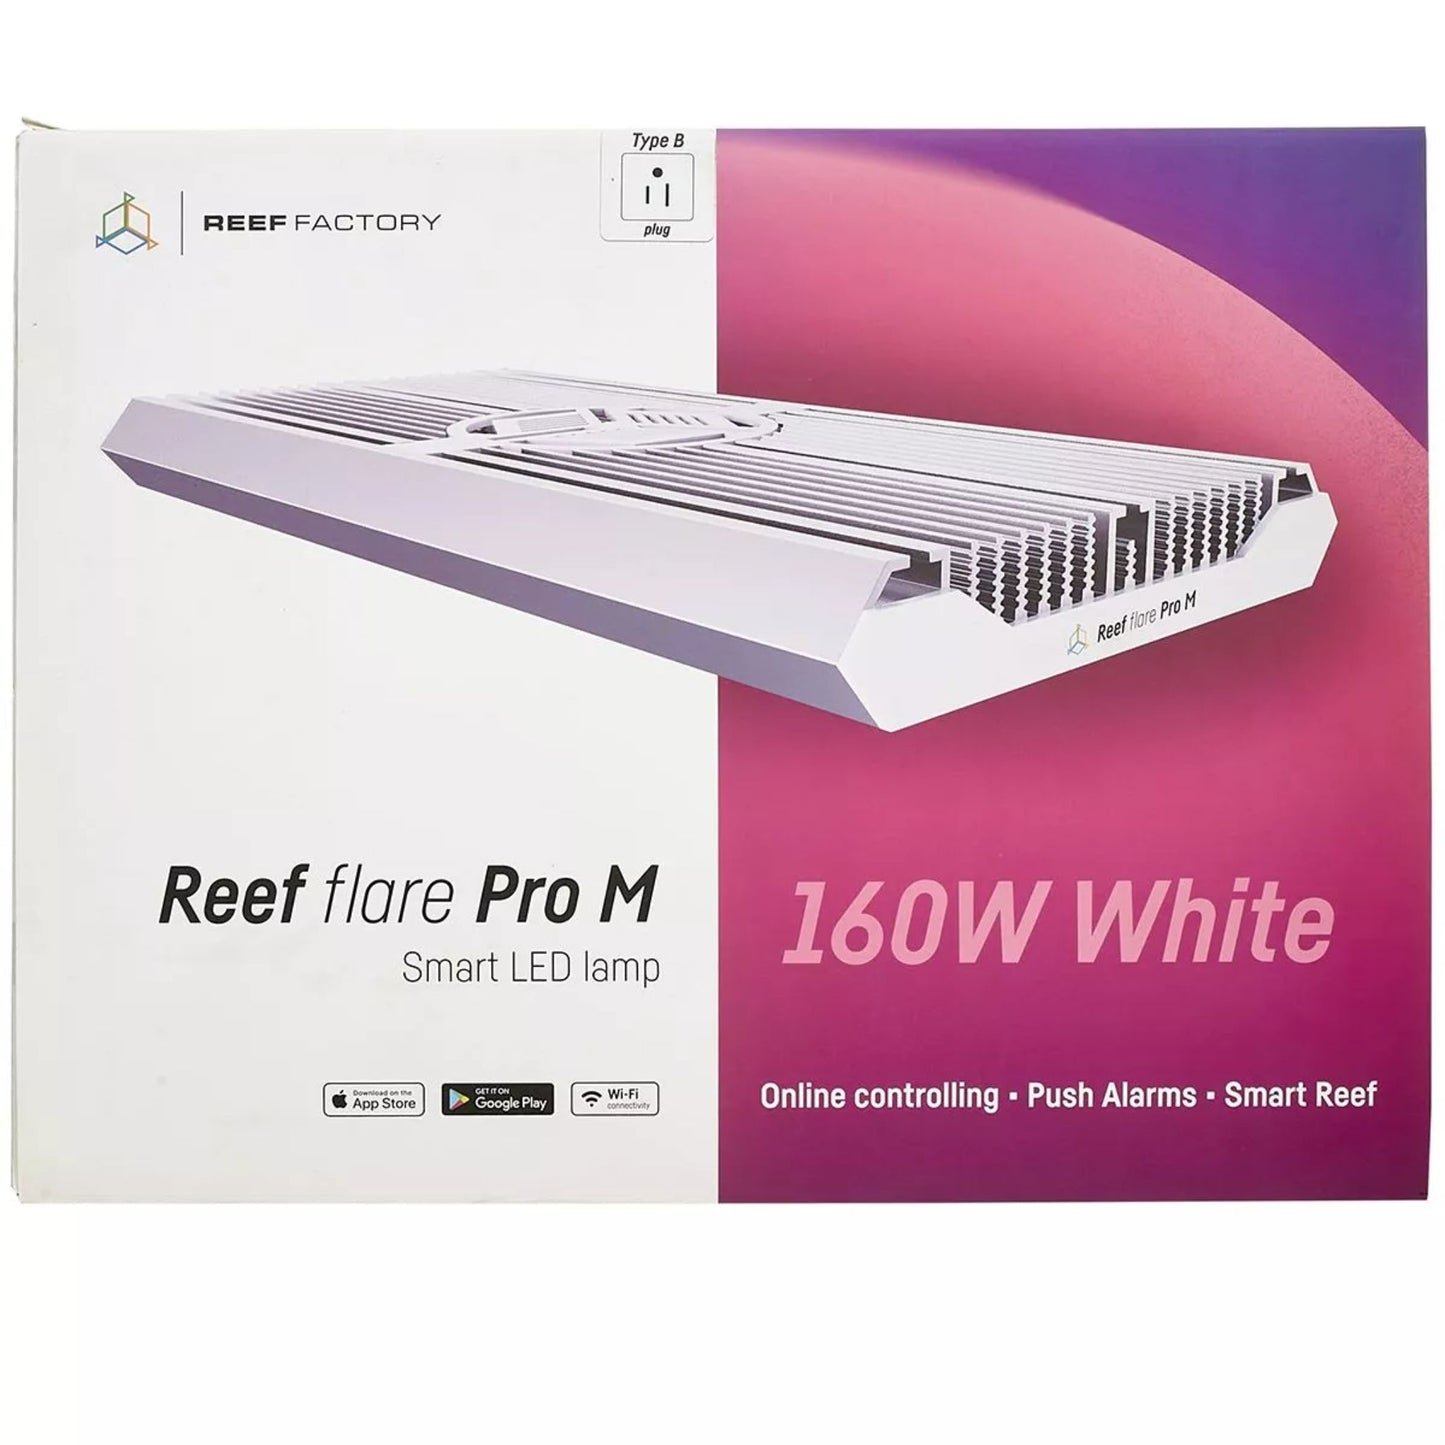 Reef Flare Pro M LED Light - Reef Factory